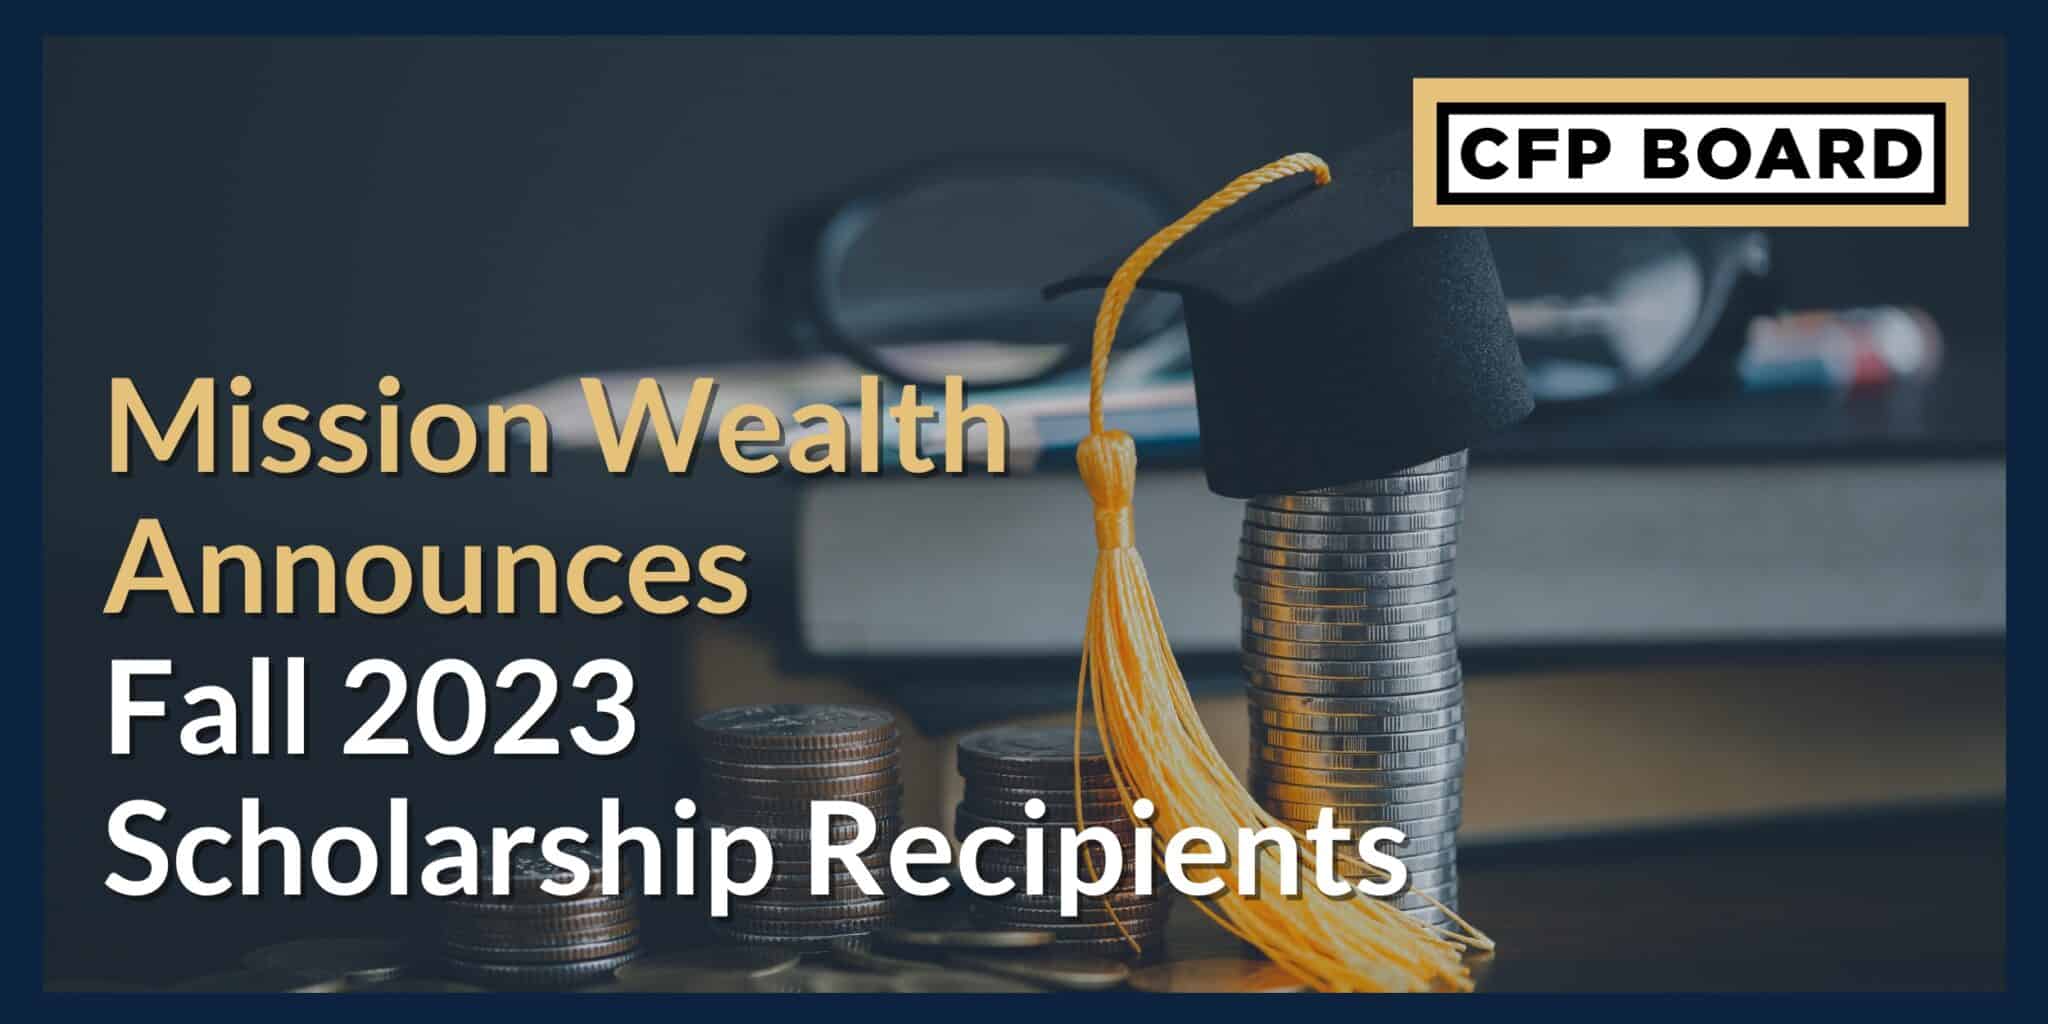 Mission Wealth Announces Fall 2023 Scholarship Recipients